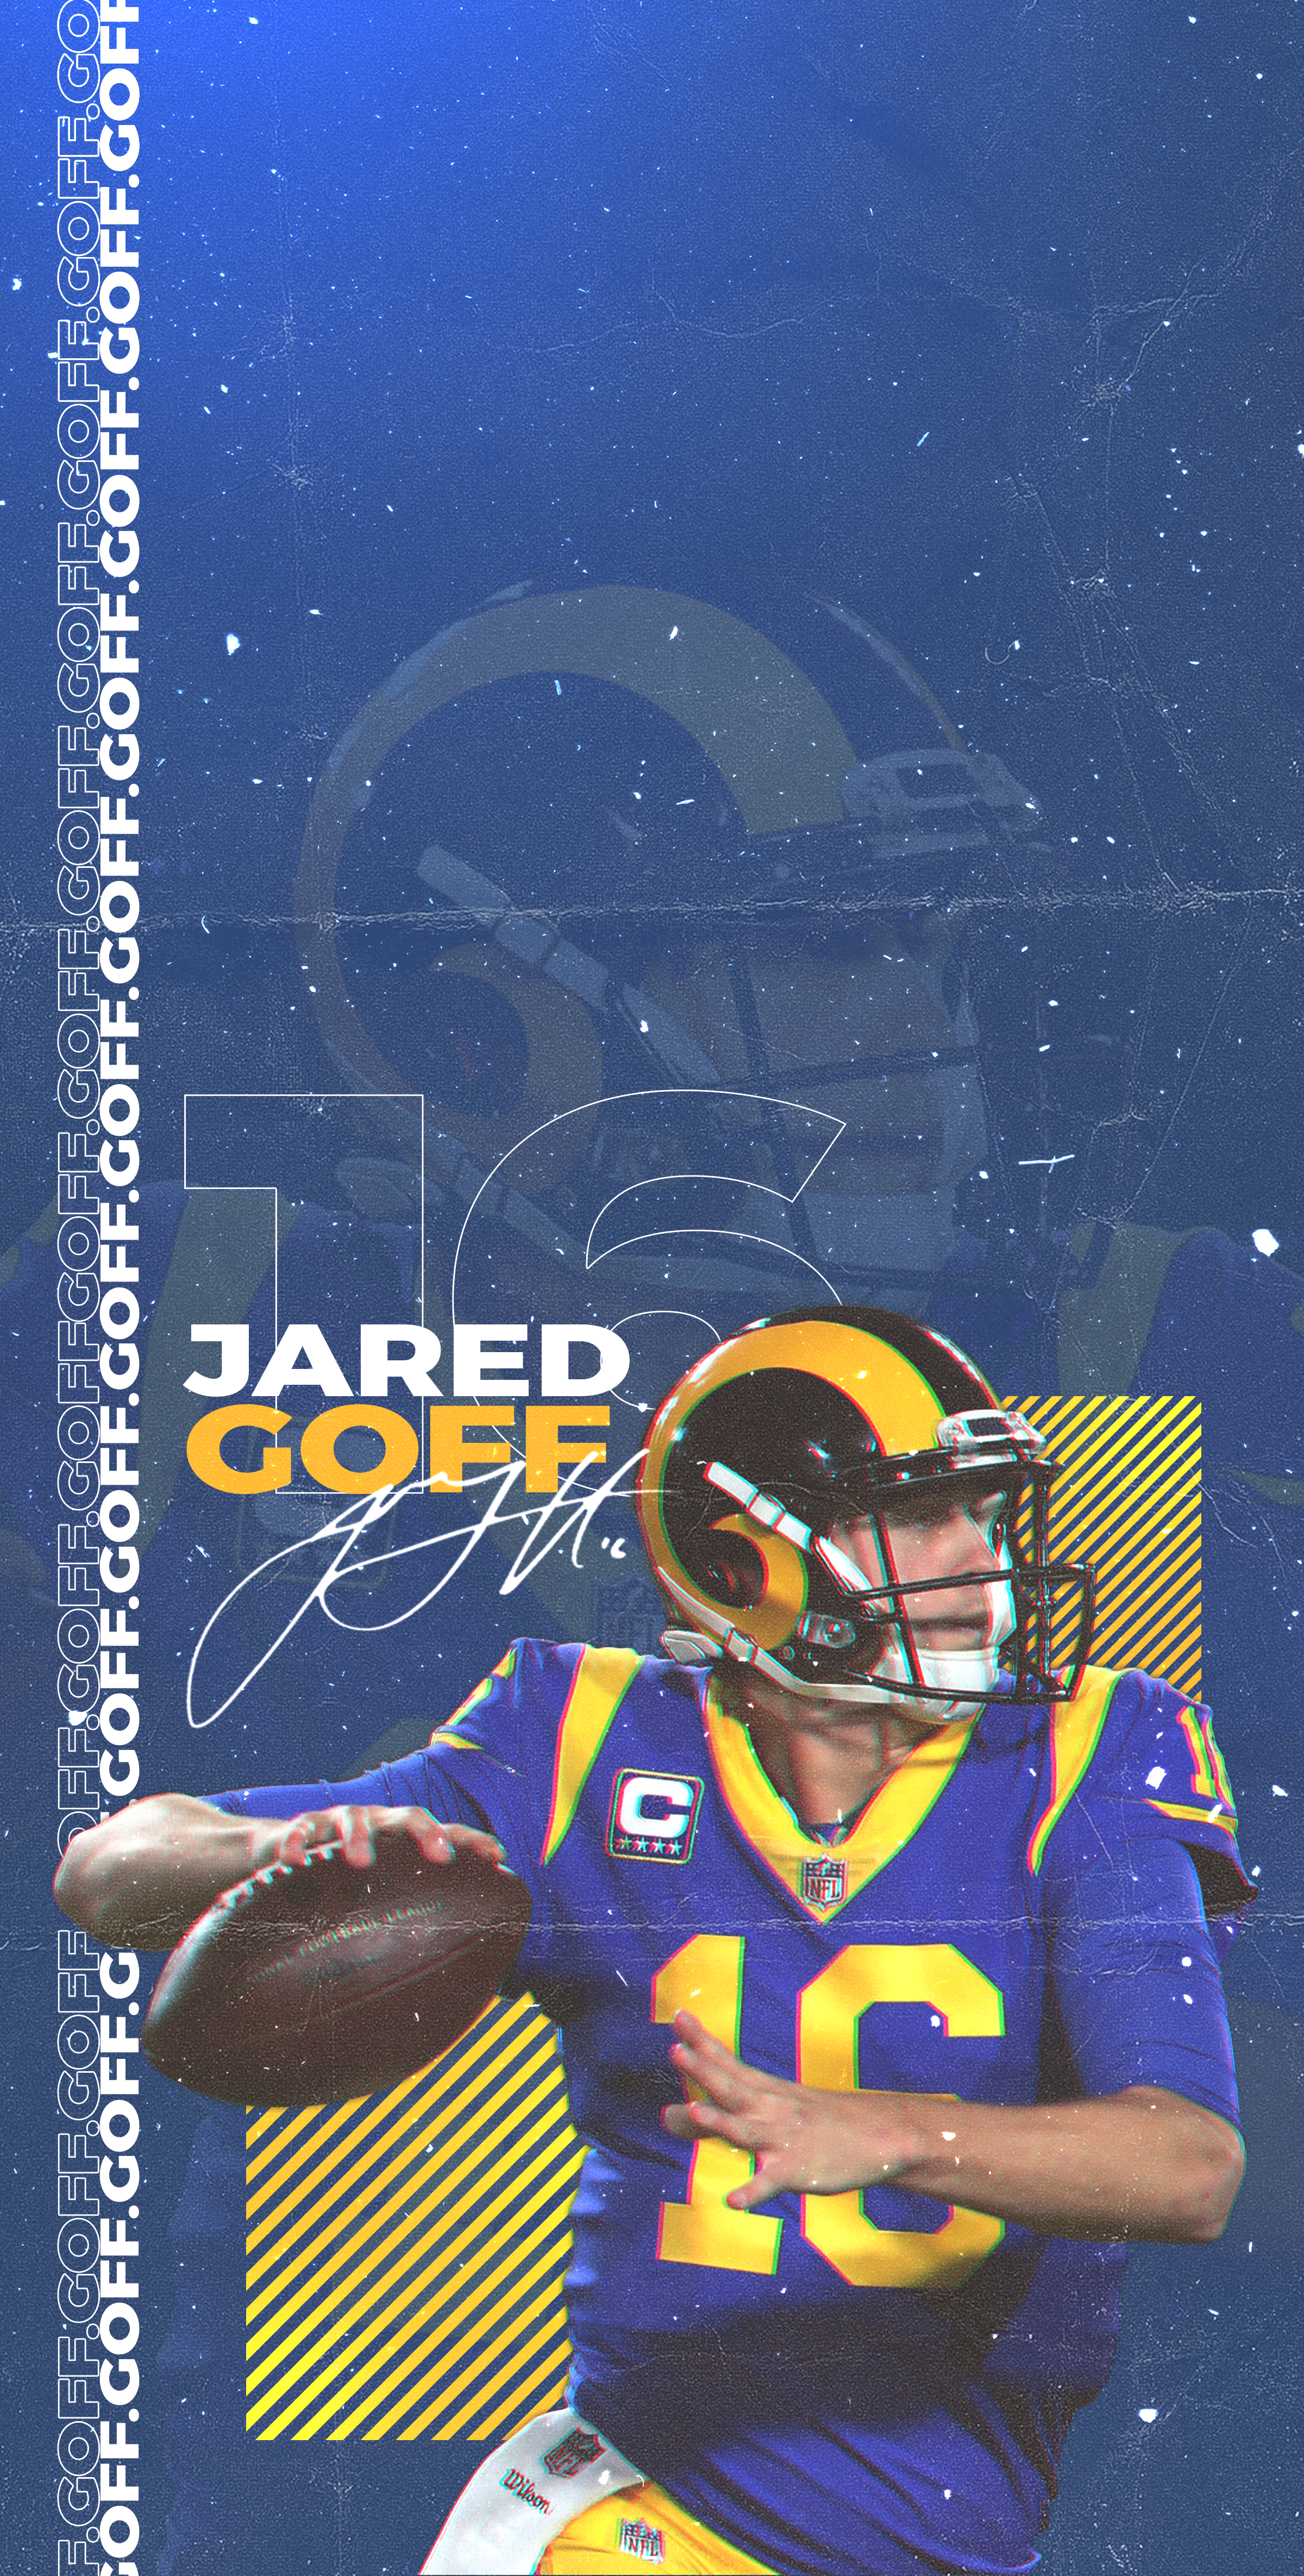 As Requested The Jared Goff Design I Made Turned Into A Phone